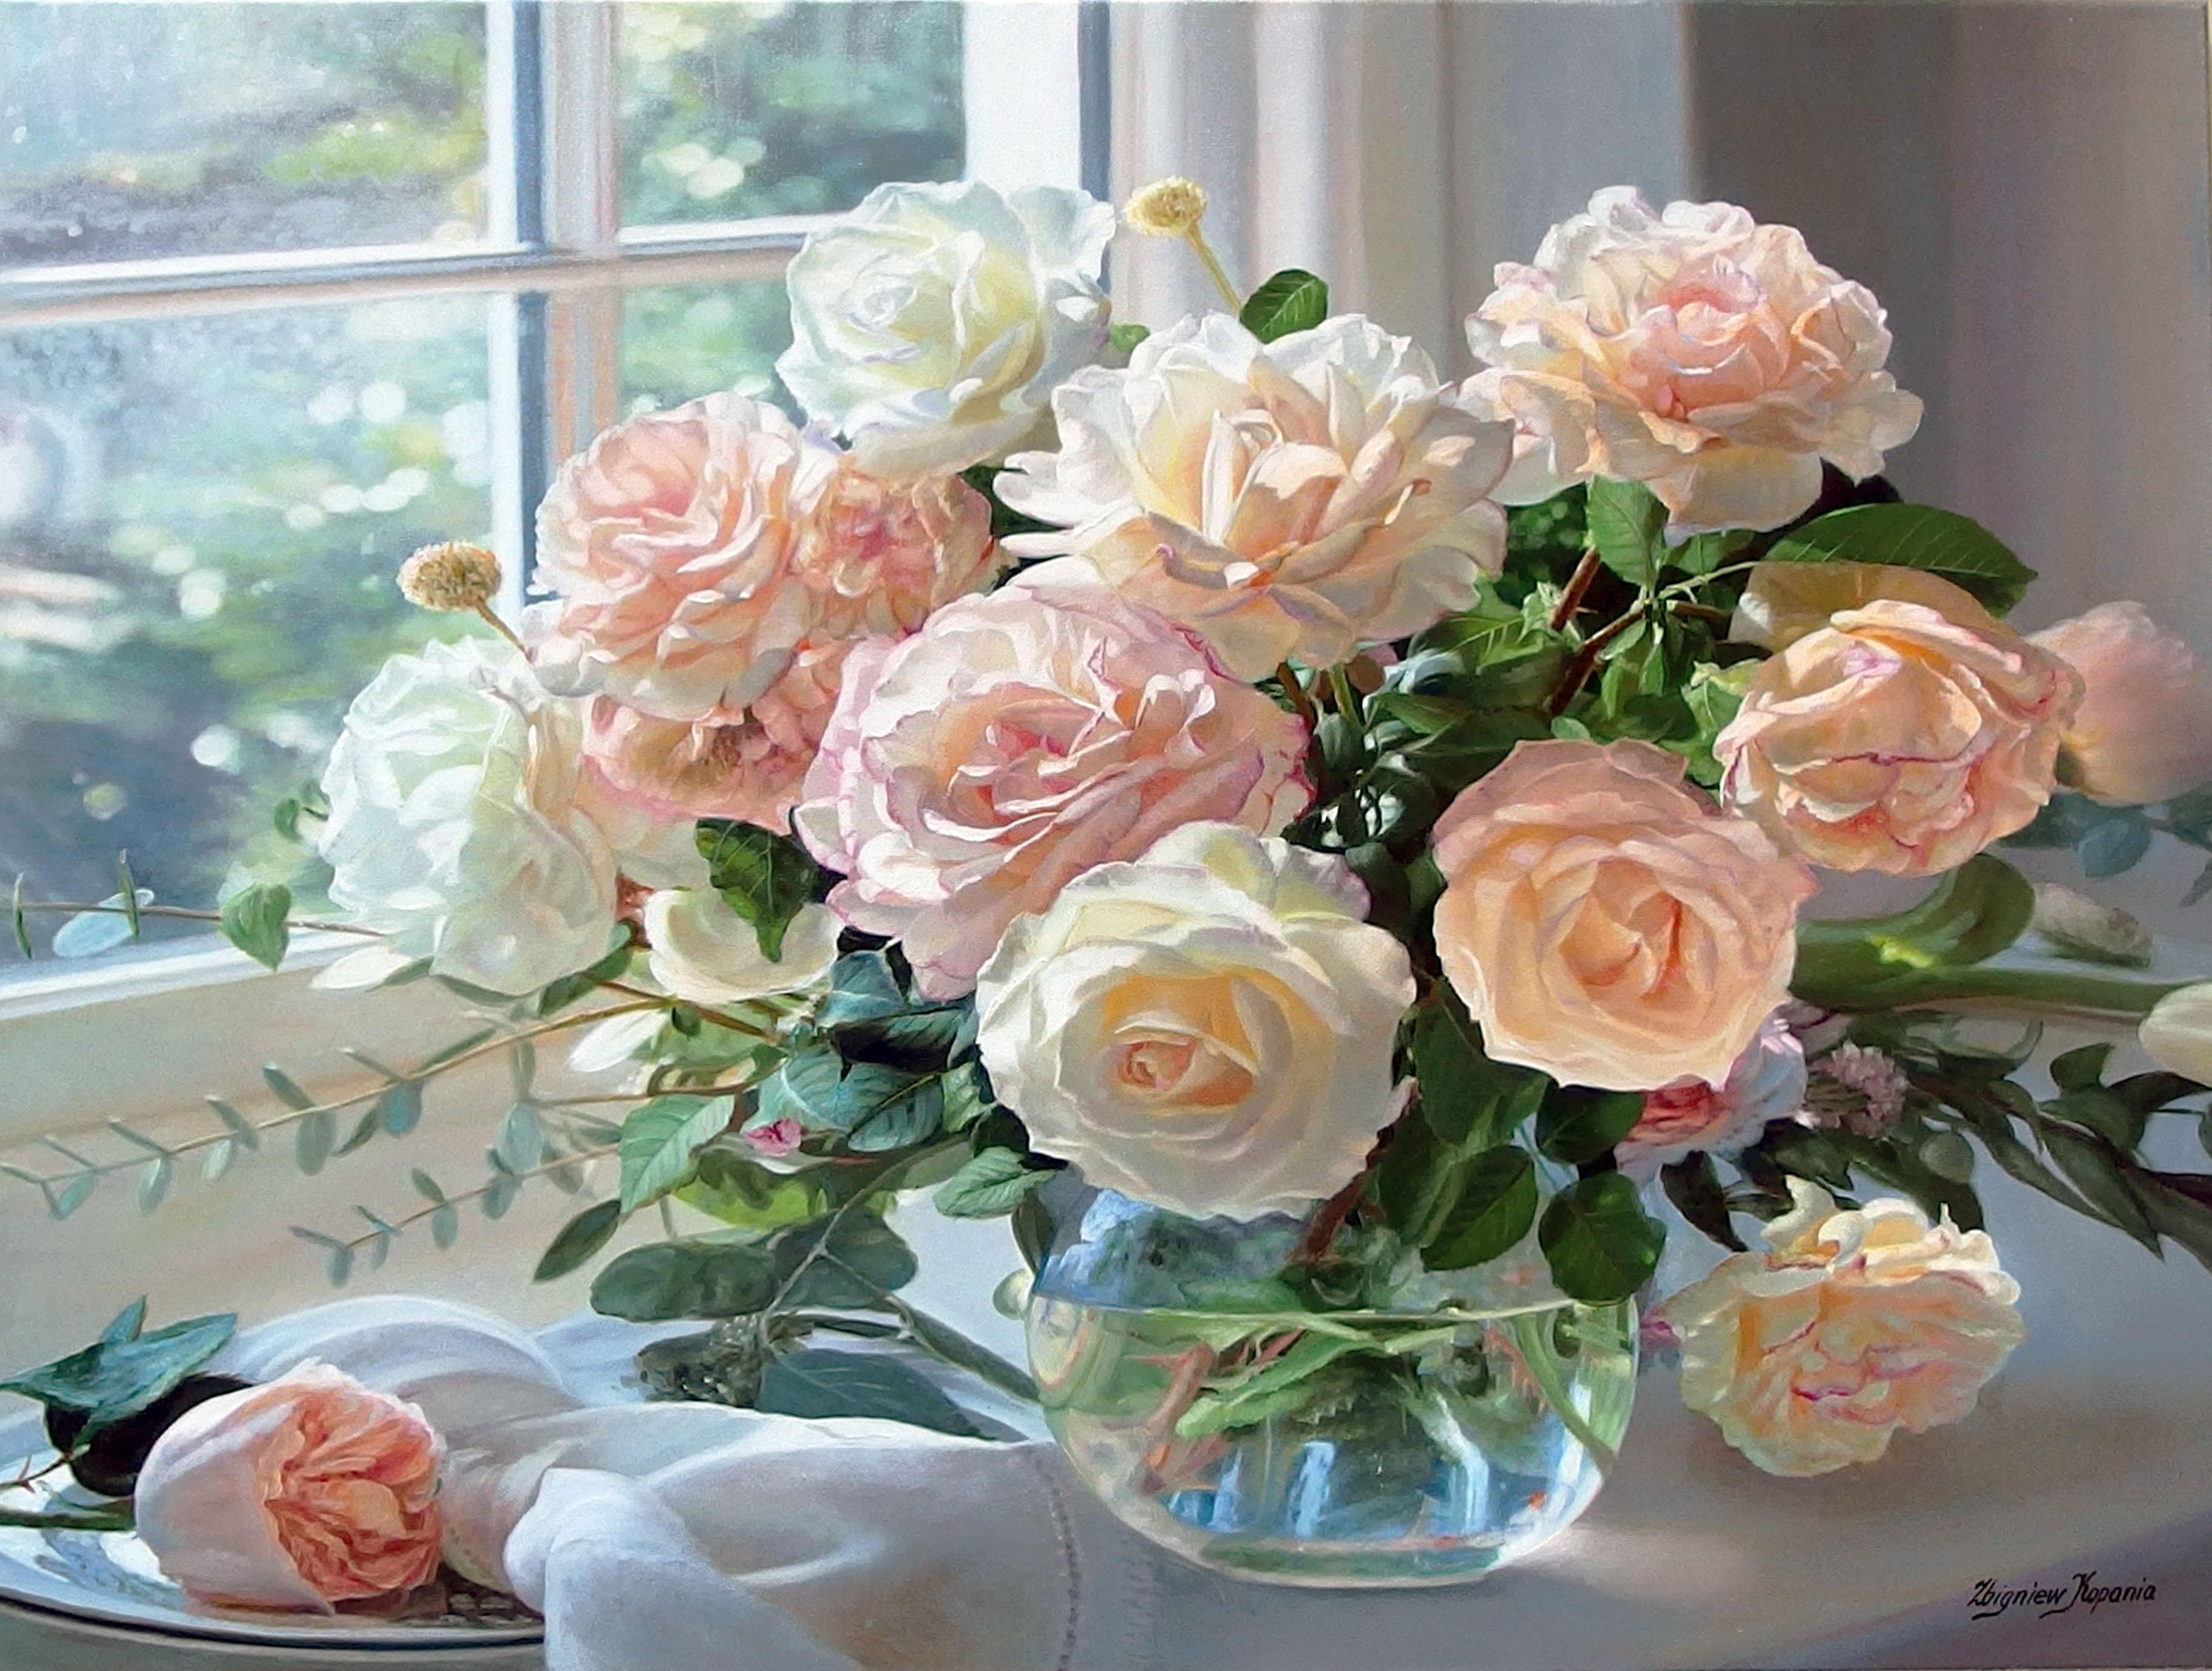 Zbigniew Kopania Still-Life Painting - Roses In The Window Oil On Canvas